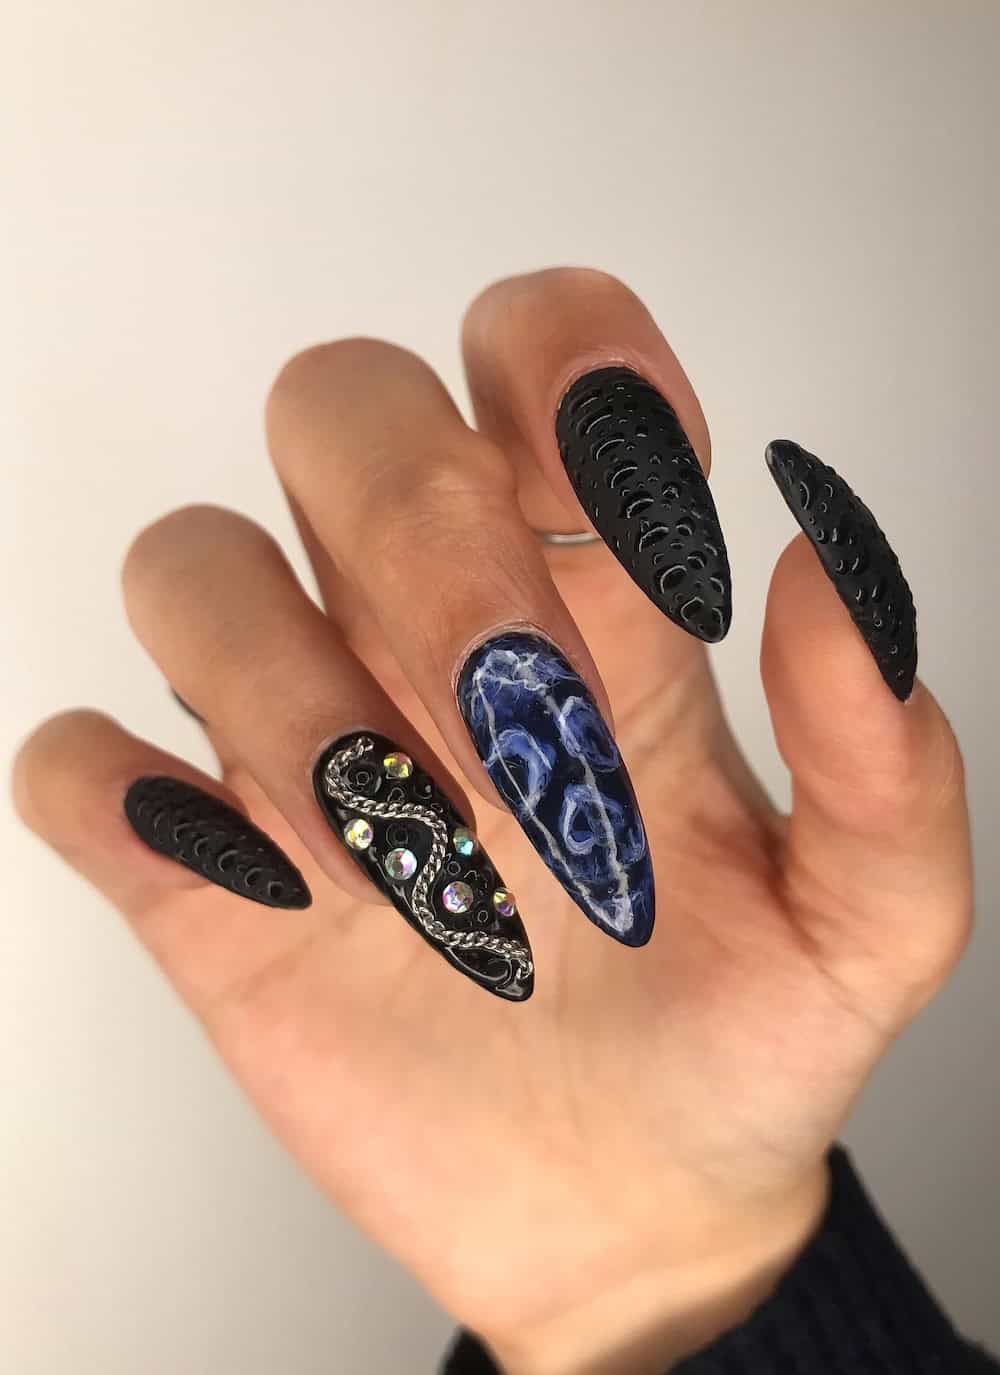 long black almond nails with a skeleton face accent nails, shiny 3D dots, and chain and gem details